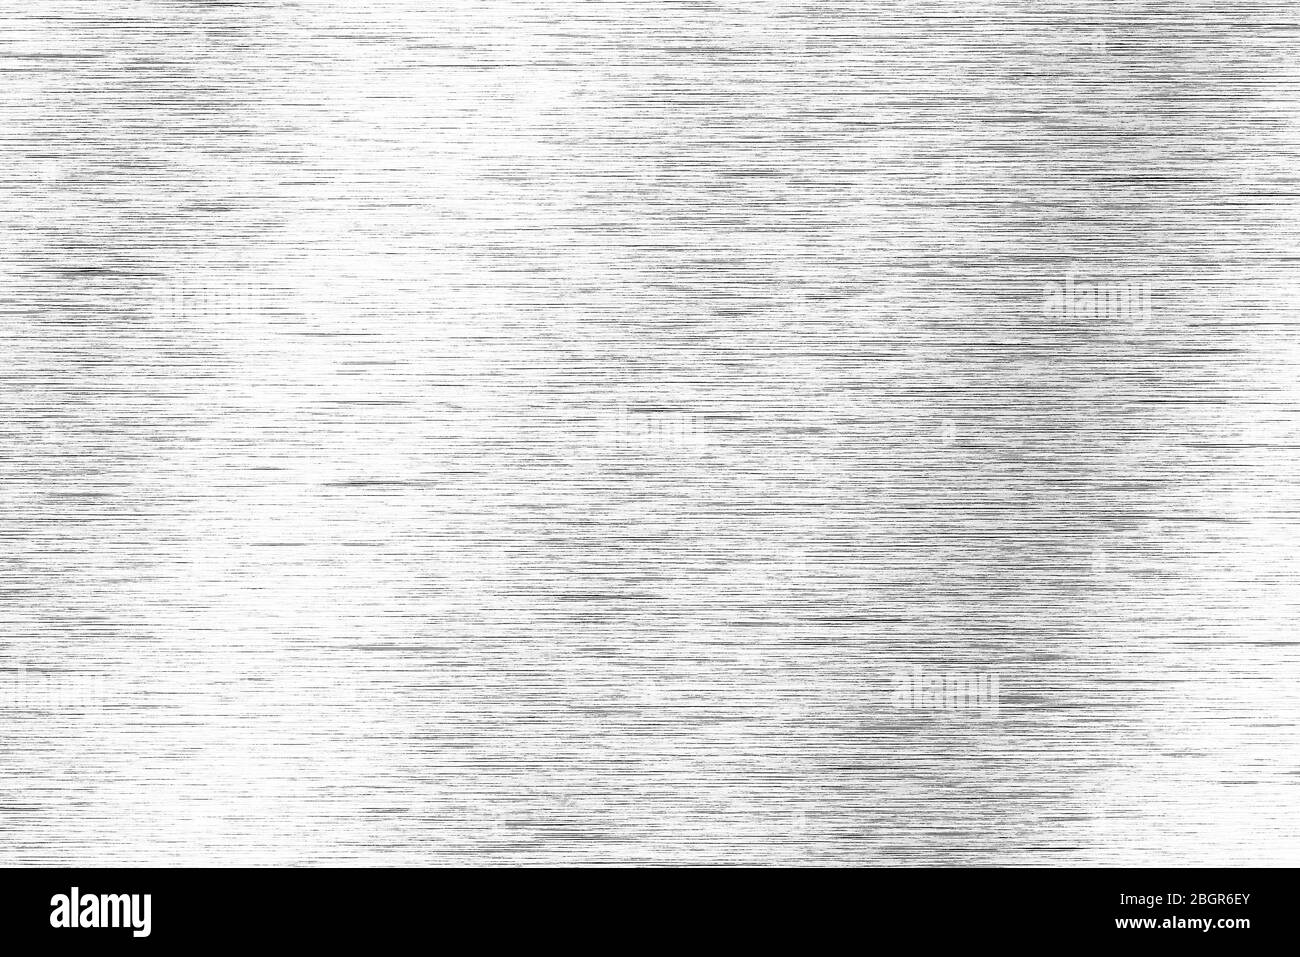 Brushed  light metal texture. Polished metal  background with light reflection. Stock Photo